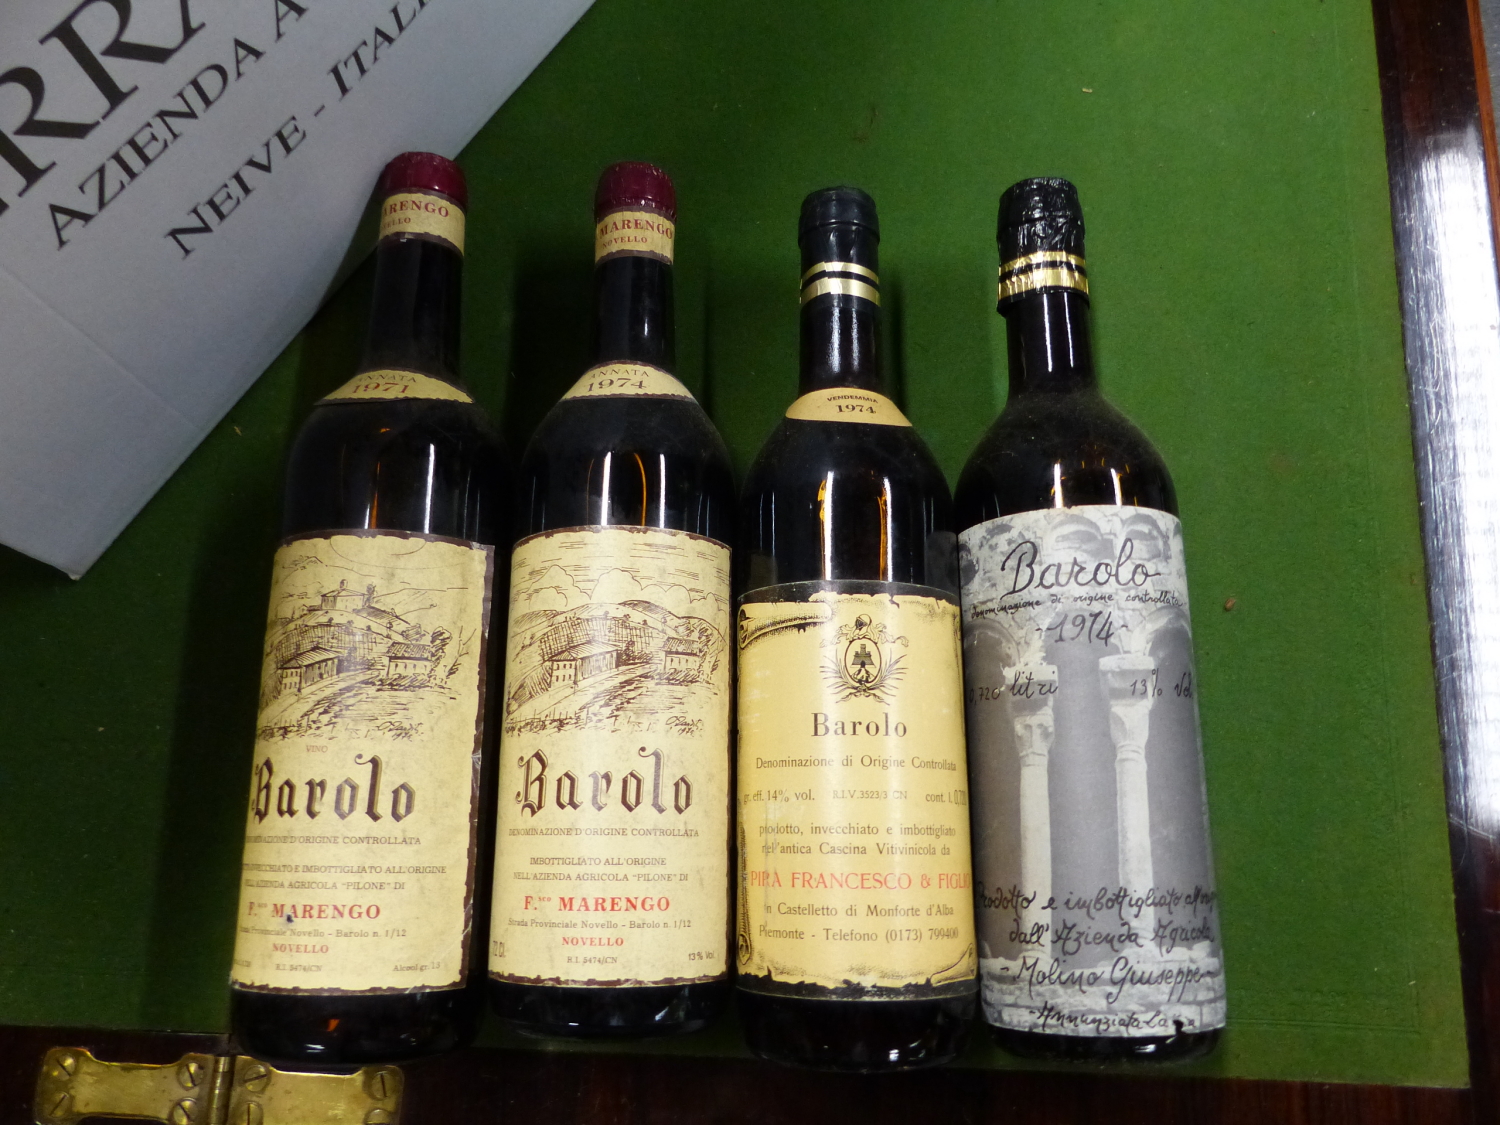 WINE, FOUR BOTTLES OF 1971 MARENGO BAROLO RED WINE TOGETHER WITH FIFTEEN VARIOUS BOTTLES OF 1974